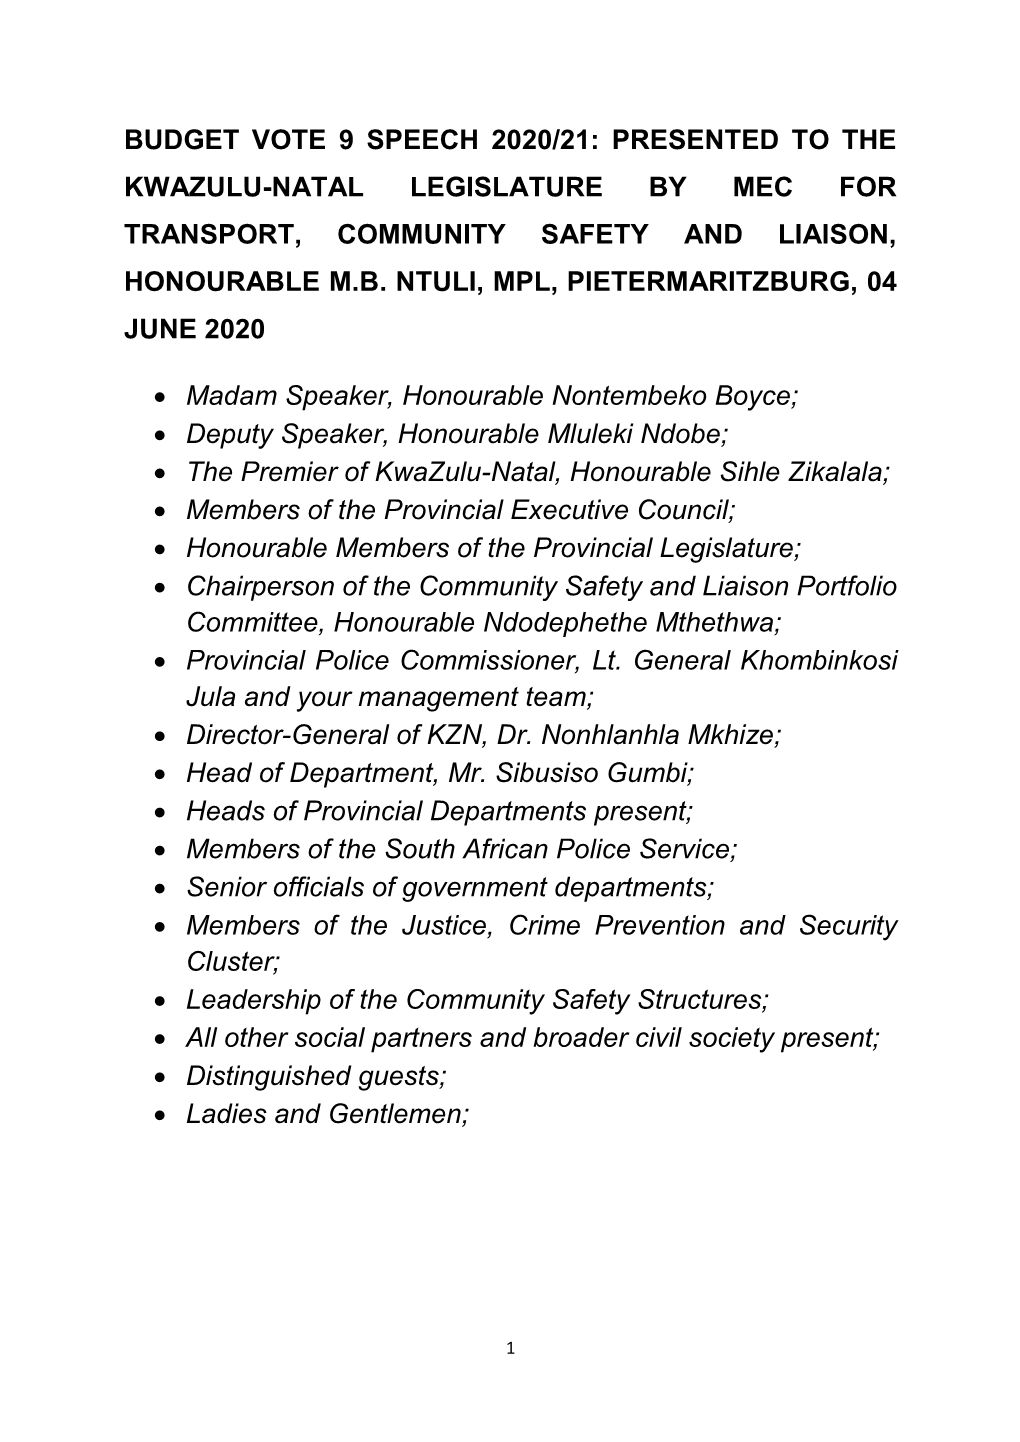 Budget Vote 9 Speech 2020/21: Presented to the Kwazulu-Natal Legislature by Mec for Transport, Community Safety and Liaison, Honourable M.B